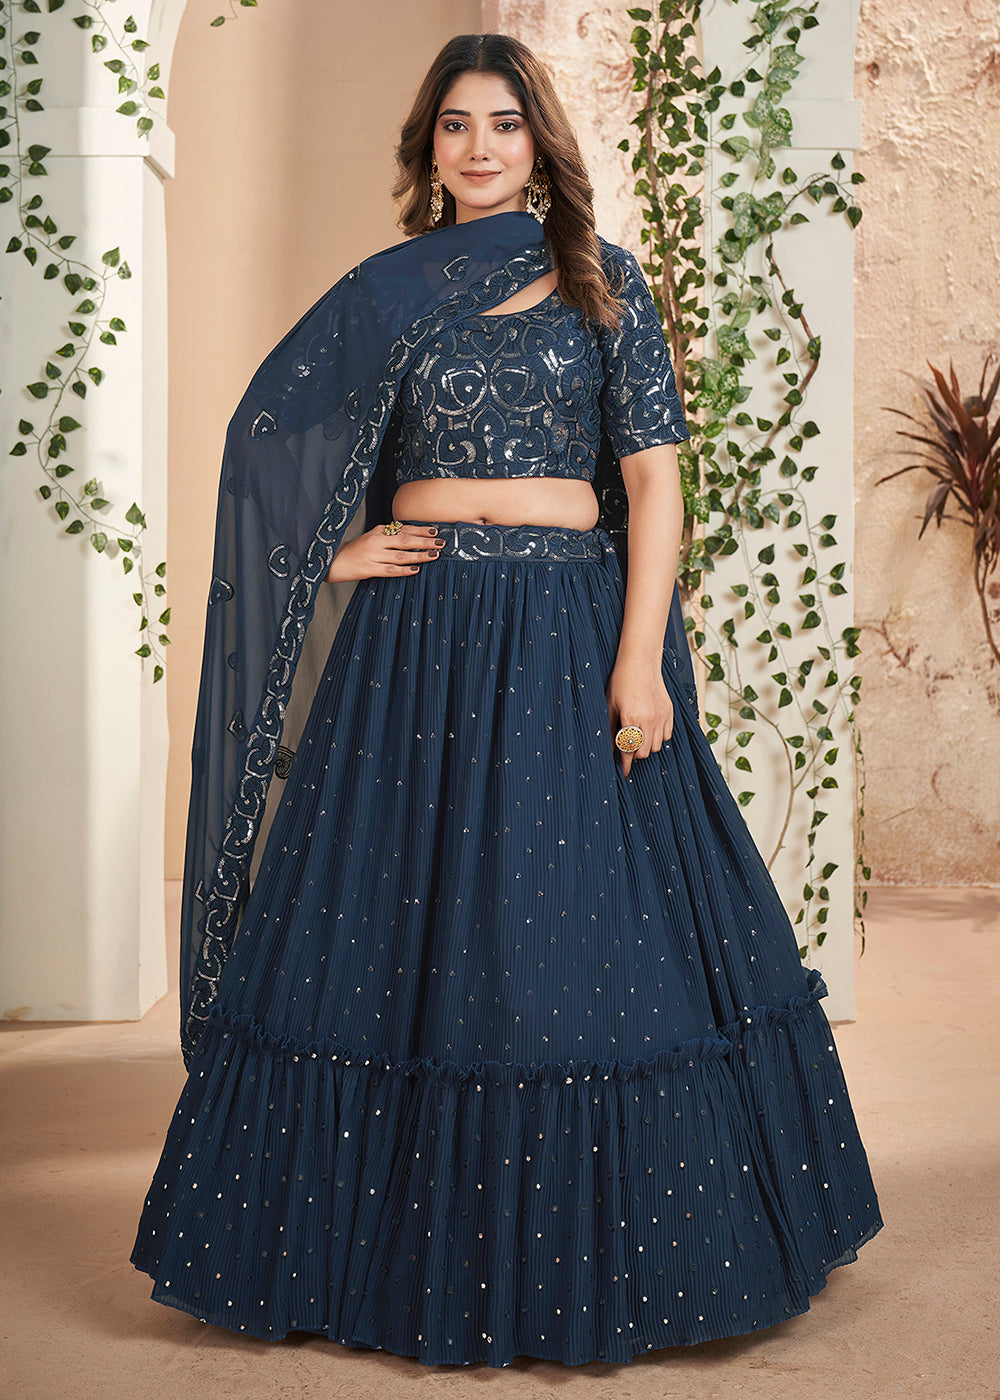 Buy Now Blue Thread & Sequins Wedding Party Lehenga Choli Online in USA, UK, Canada & Worldwide at Empress Clothing.